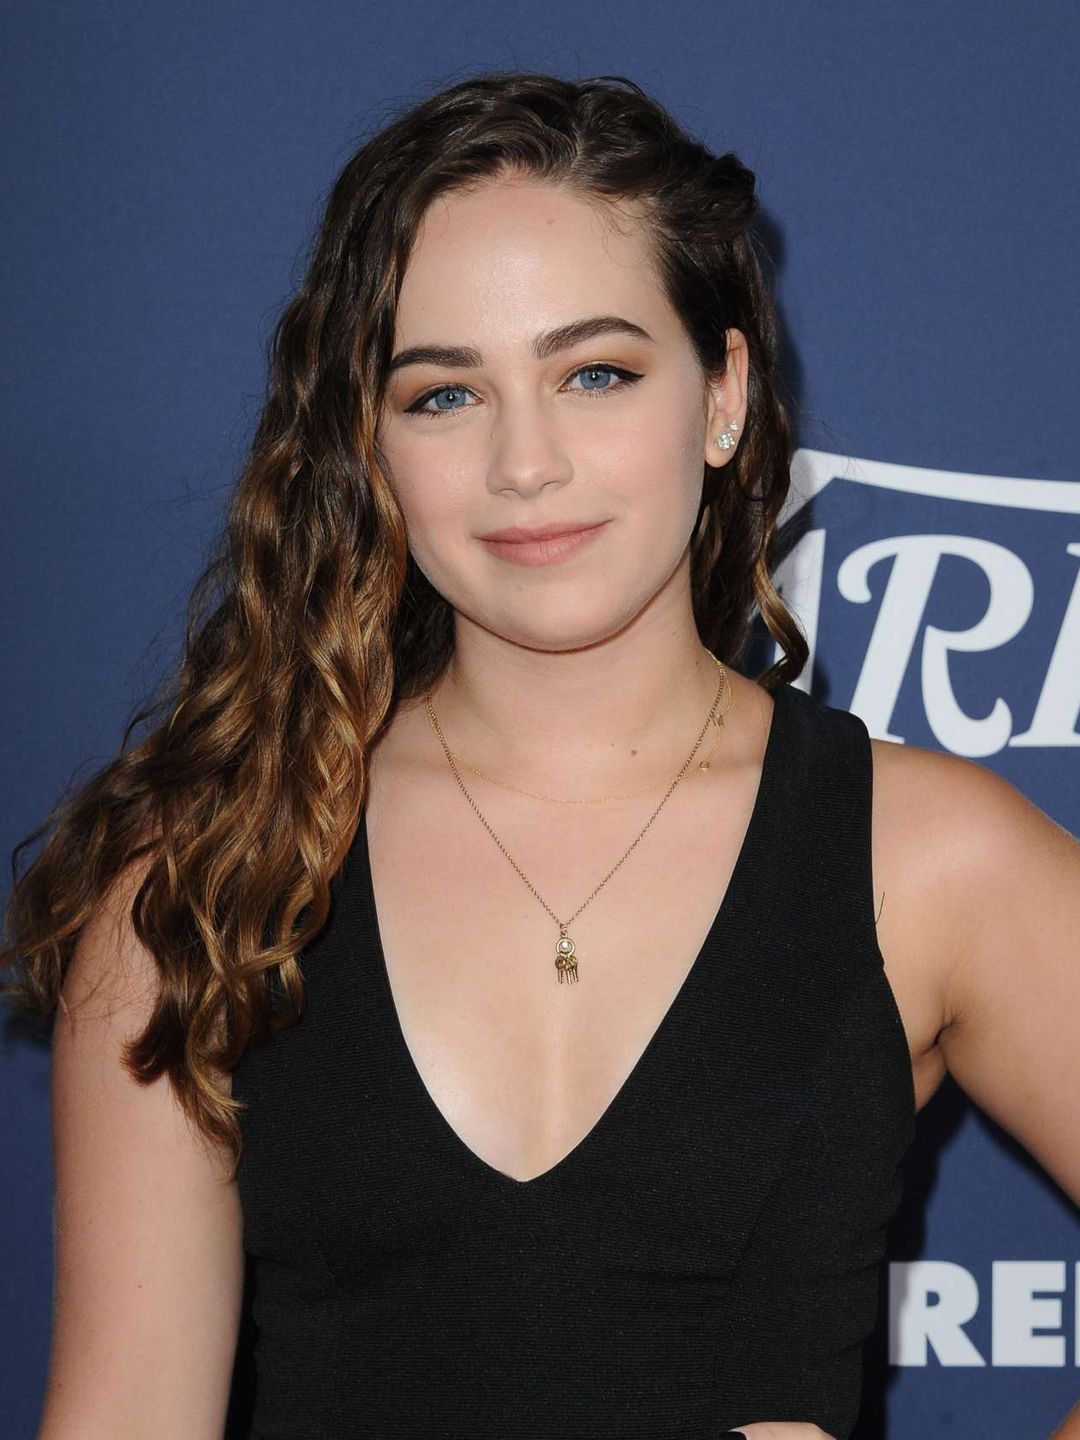 Mary Mouser in her youth